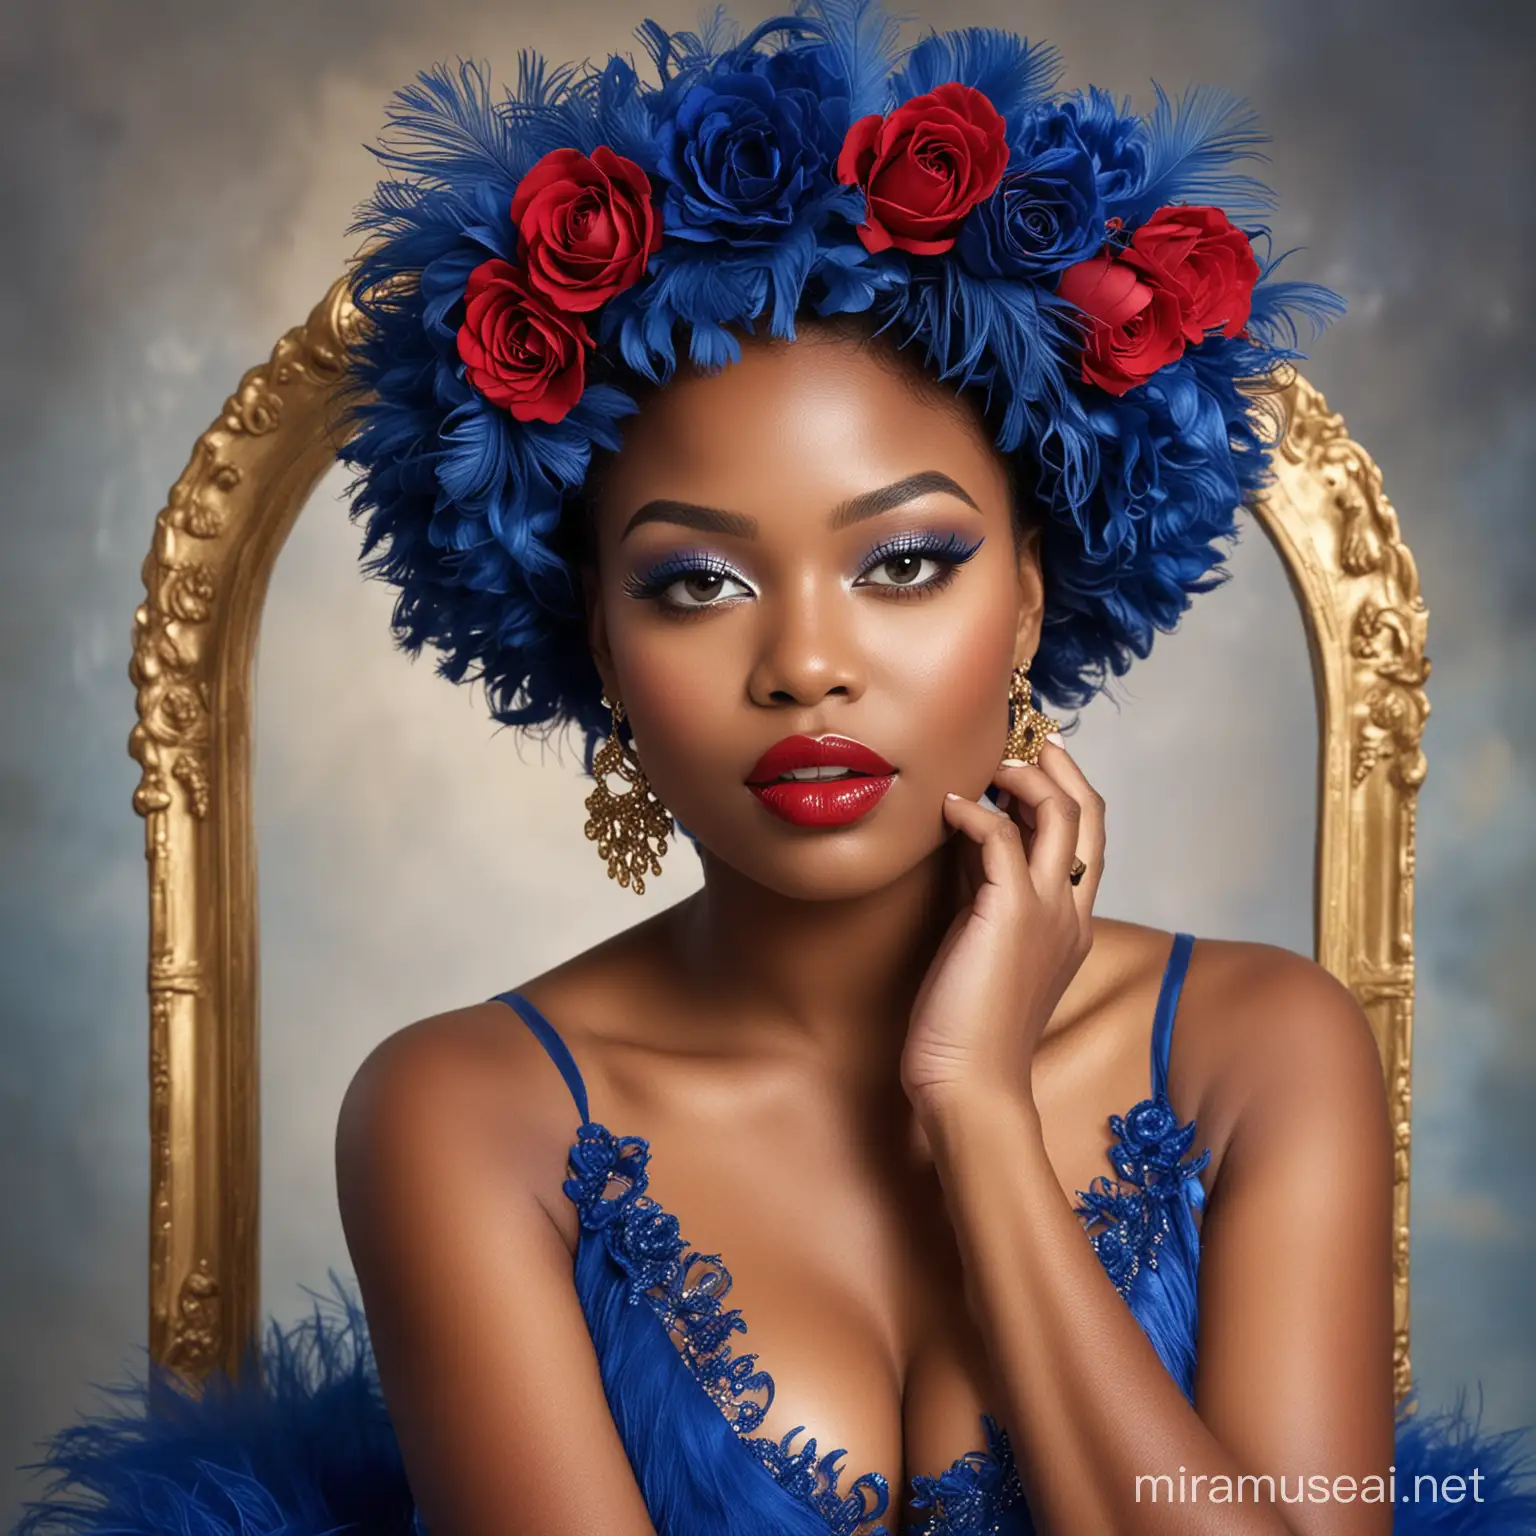 Beautiful African American Model in Floral Headpiece and Feathered Dress